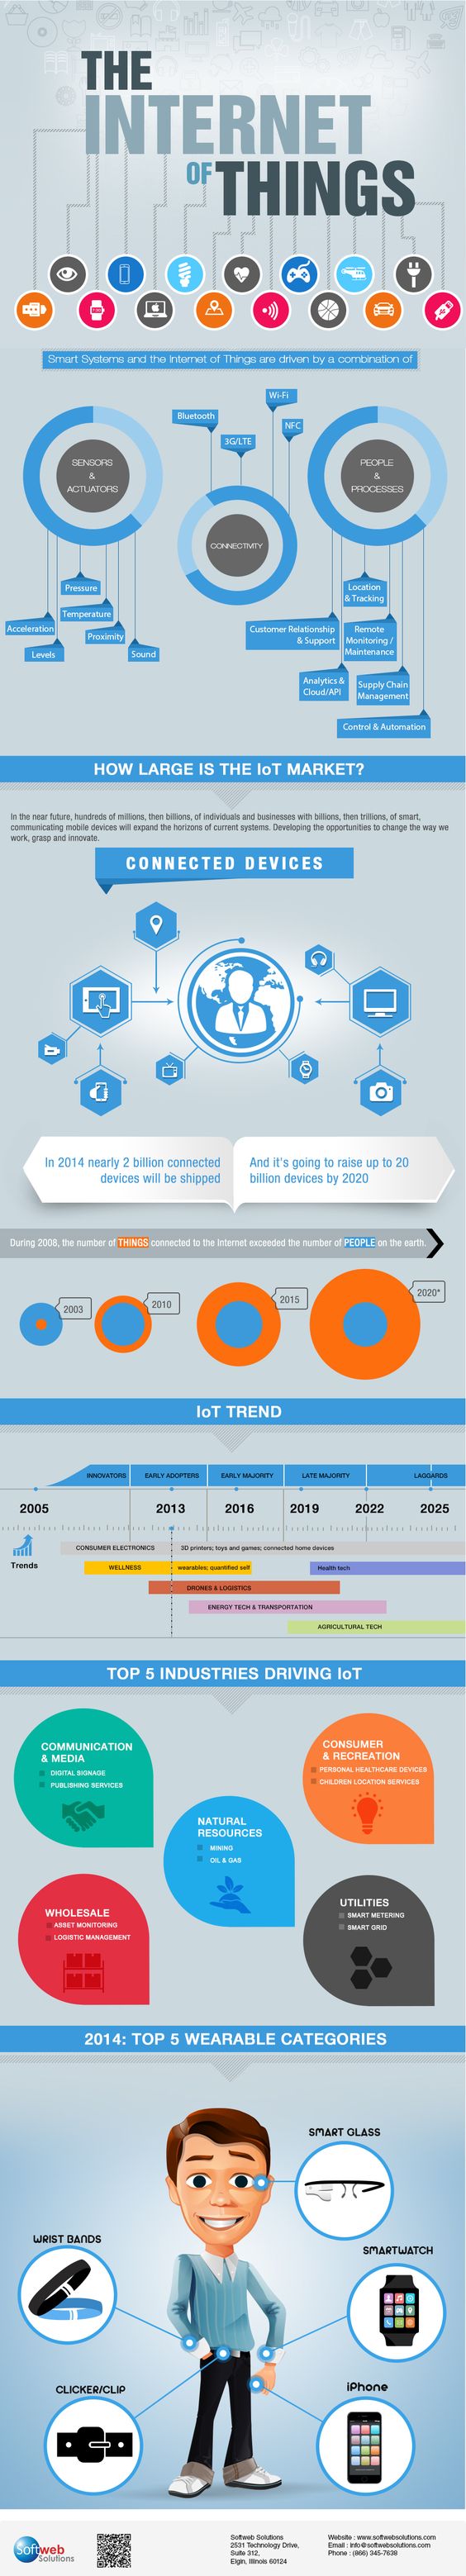 Internet of Things - The Future of Your Business Technology